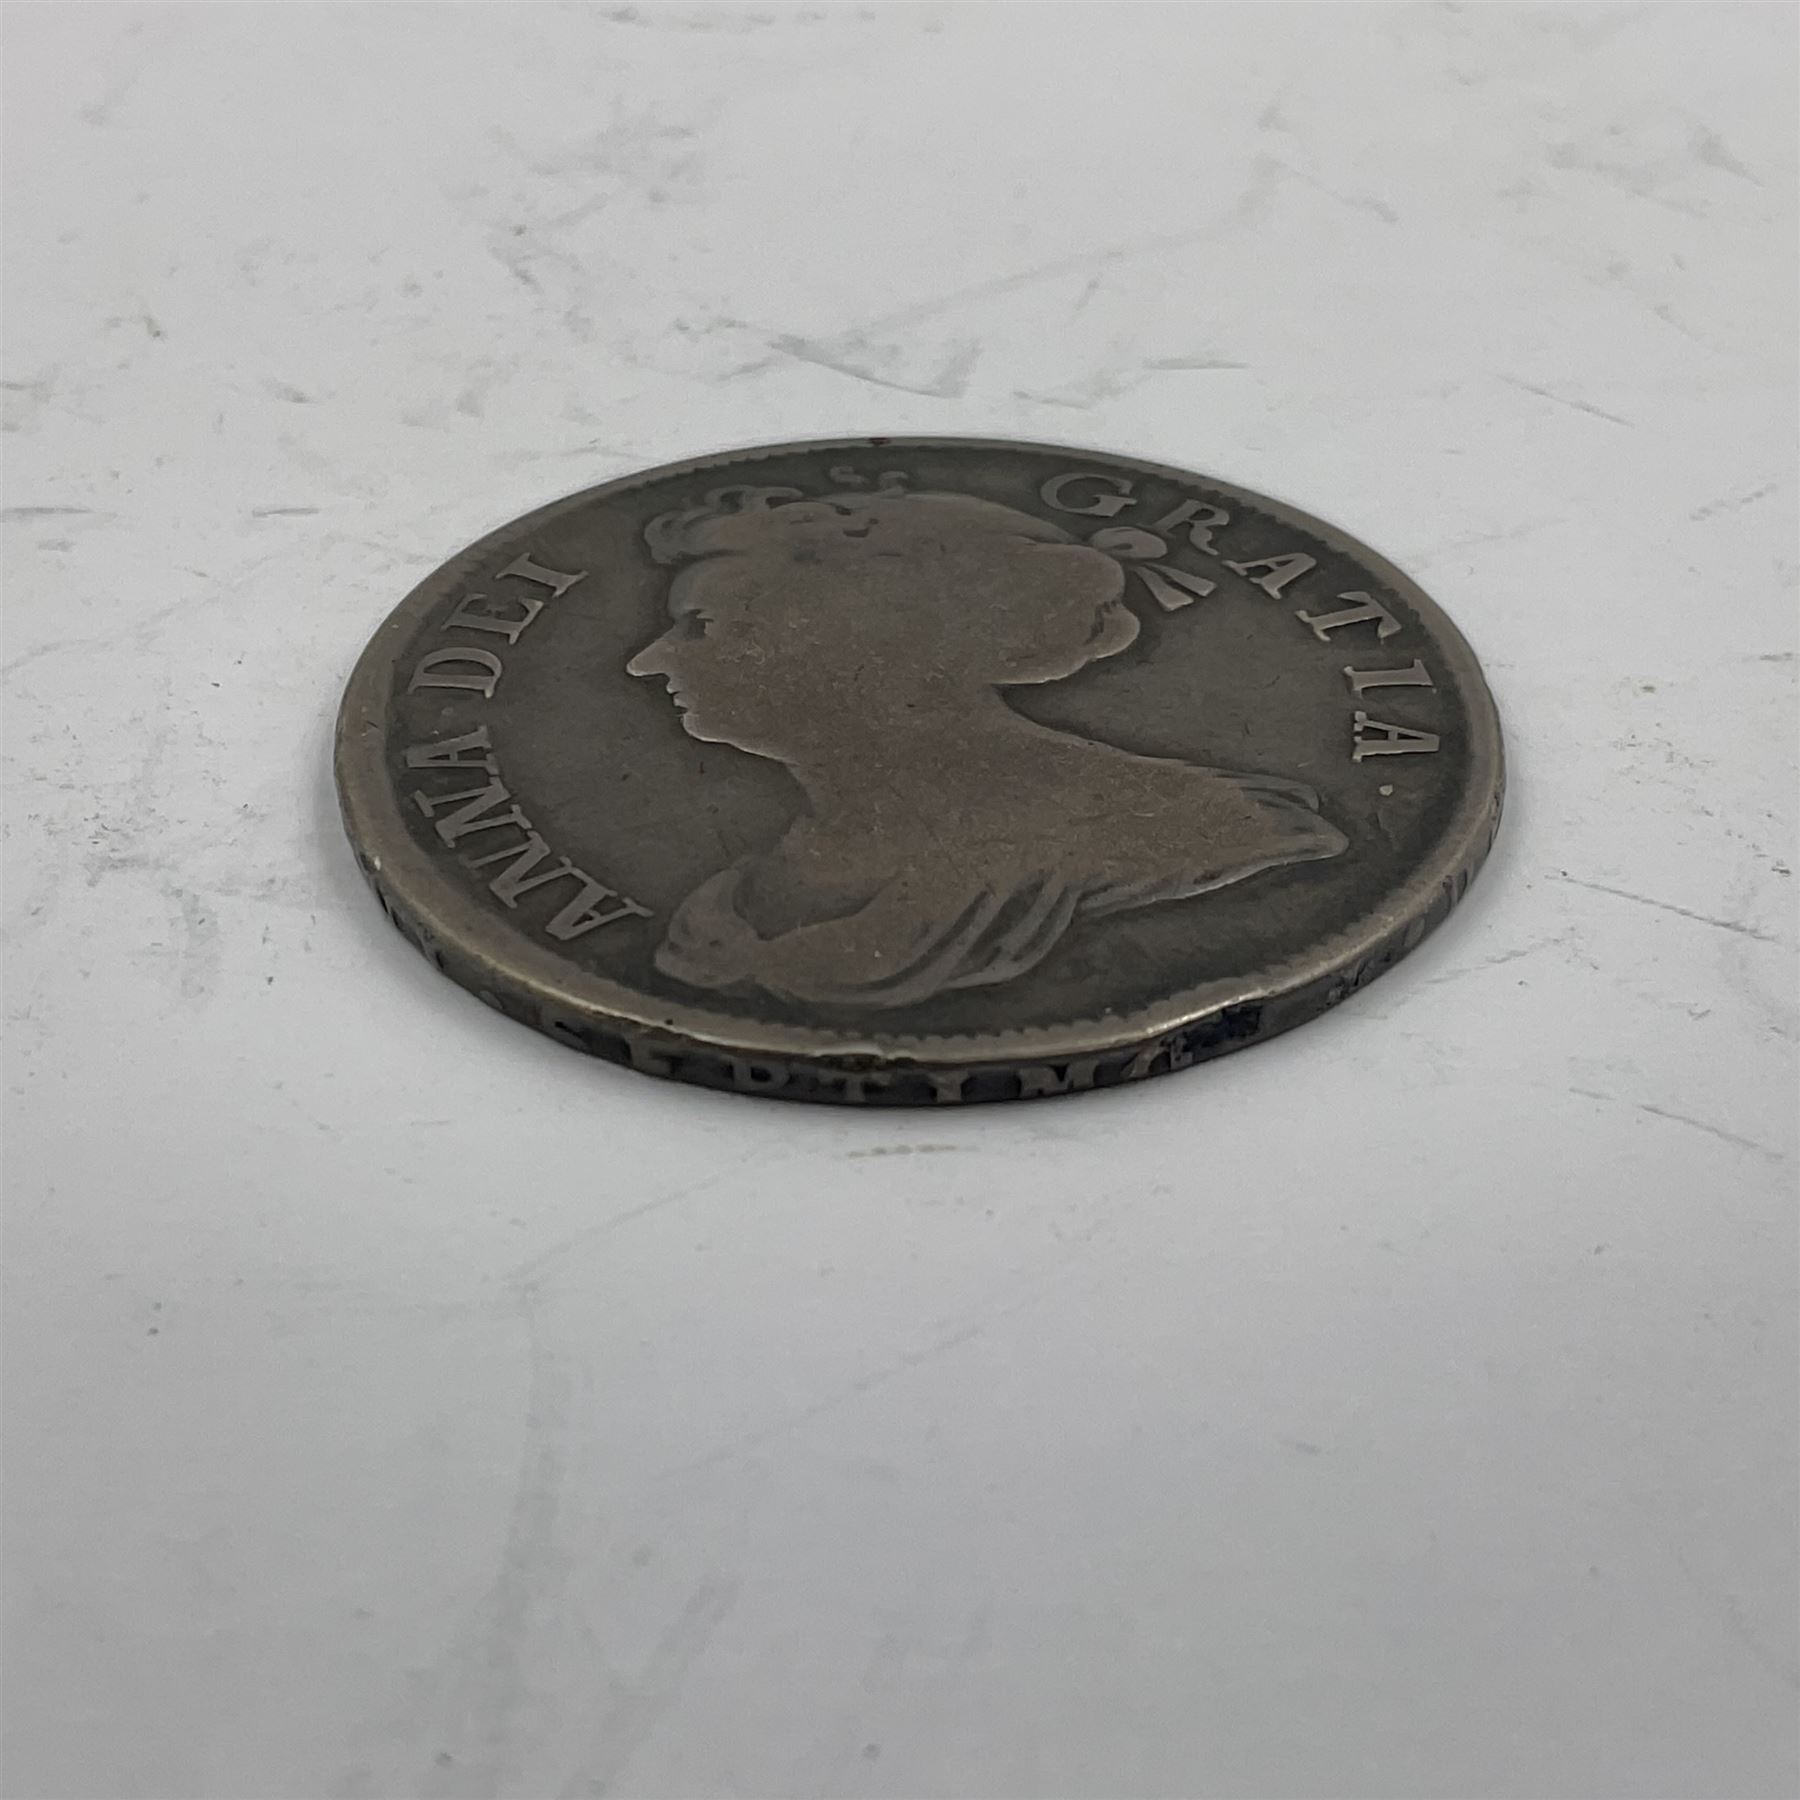 Queen Anne 1707 silver half crown coin - Image 2 of 3